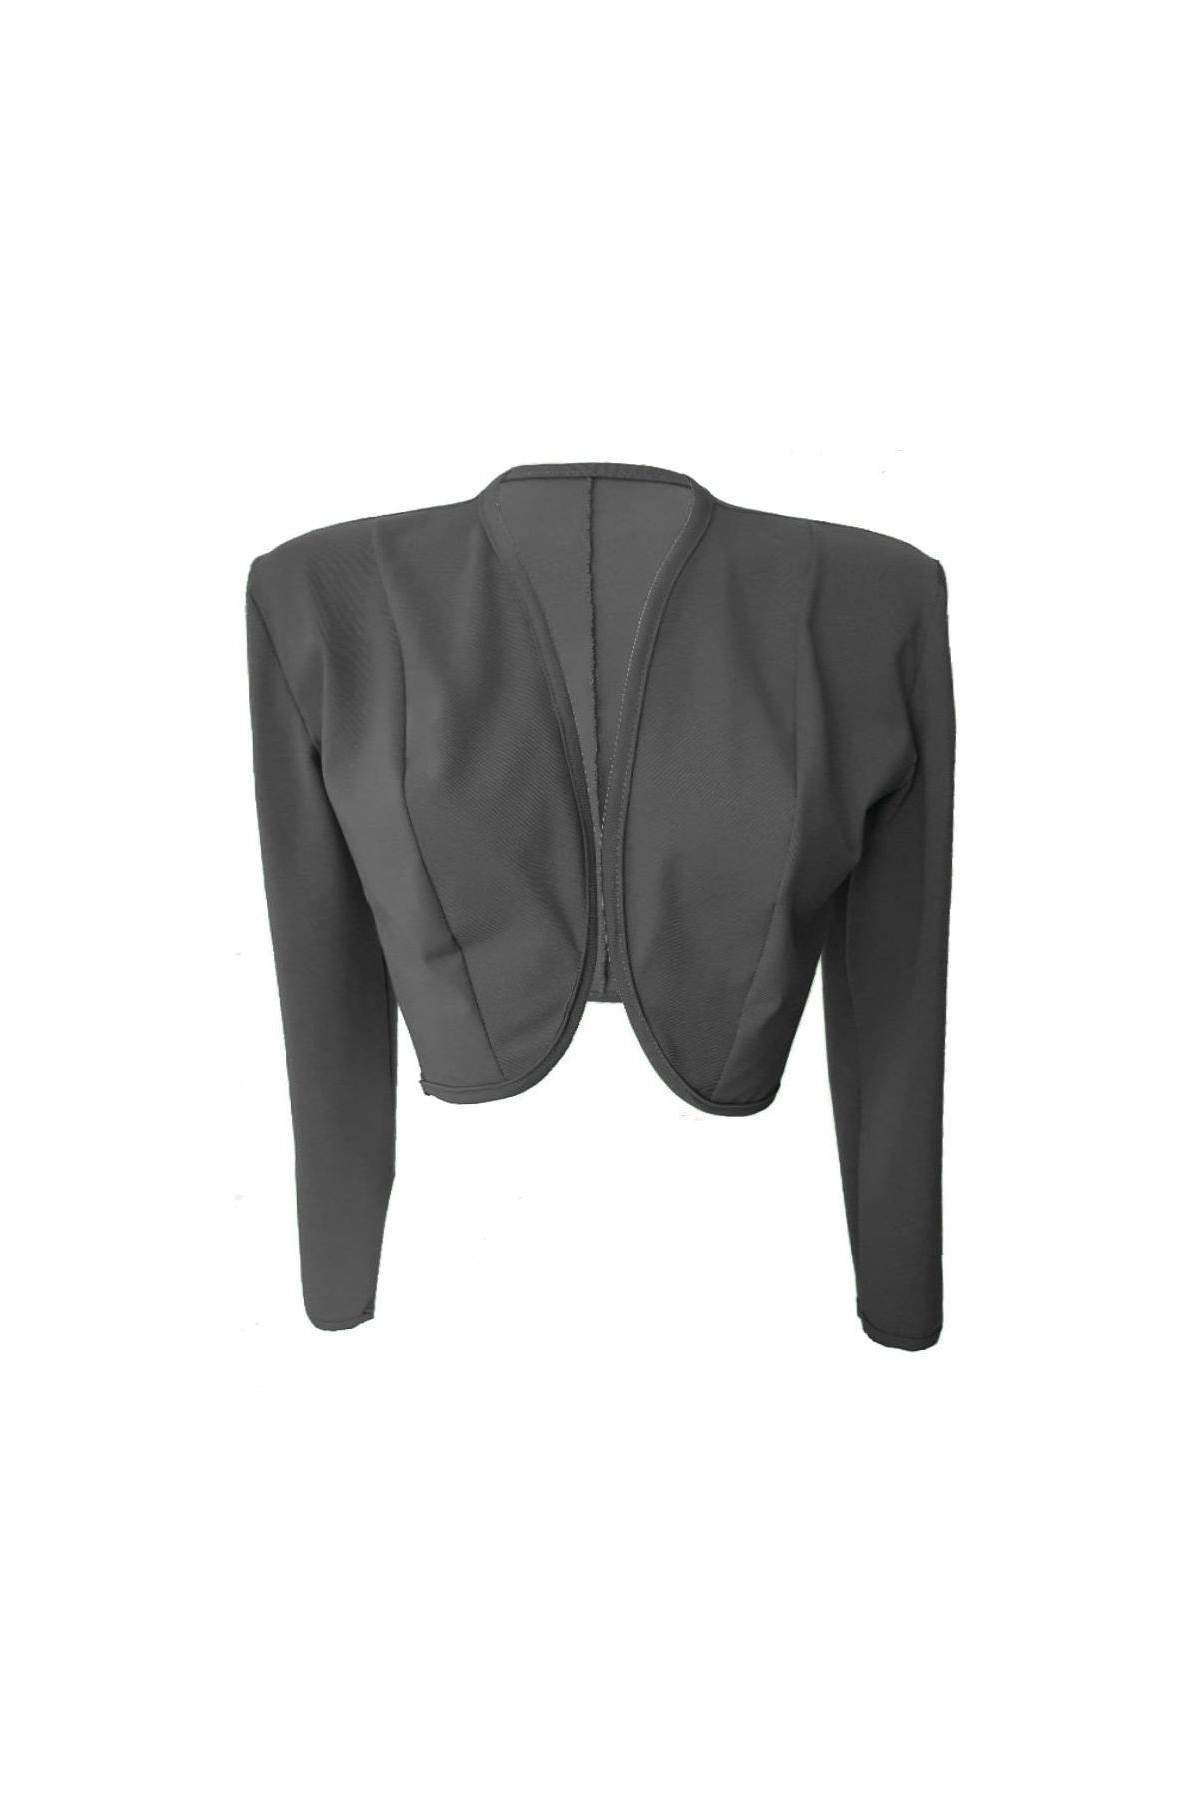 Size 34 - 52 Cotton Stretch Short Jacket Grey Magdeburg Production Single Manufacture - 